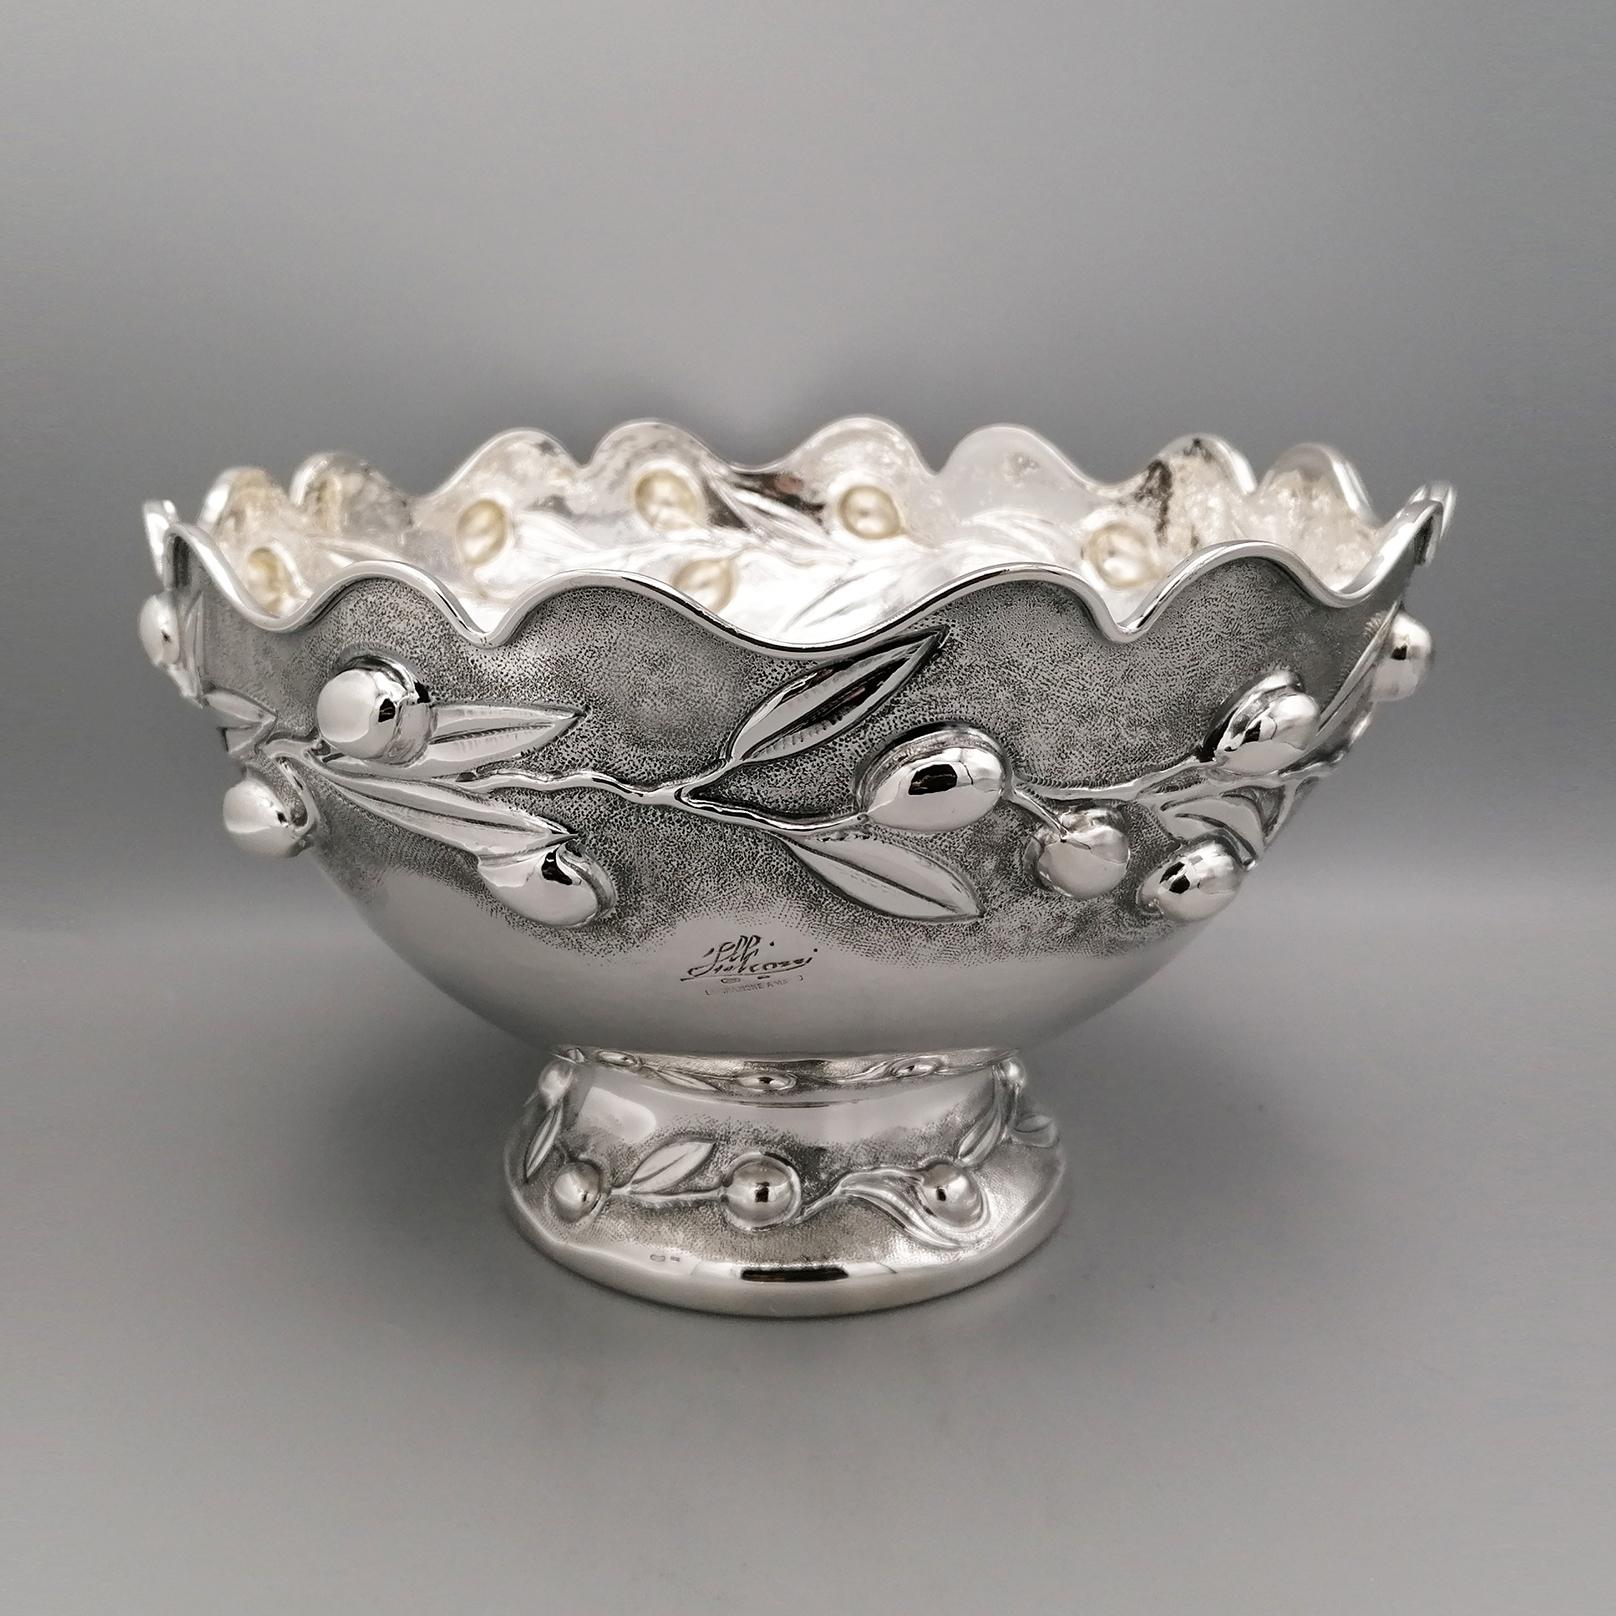 Centerpiece/bowl in solid 800 silver made entirely by hand.
The body of the bowl is rounded with the upper part scalloped in waves where a rectangular section edge was subsequently welded to ensure that the edge itself is not 